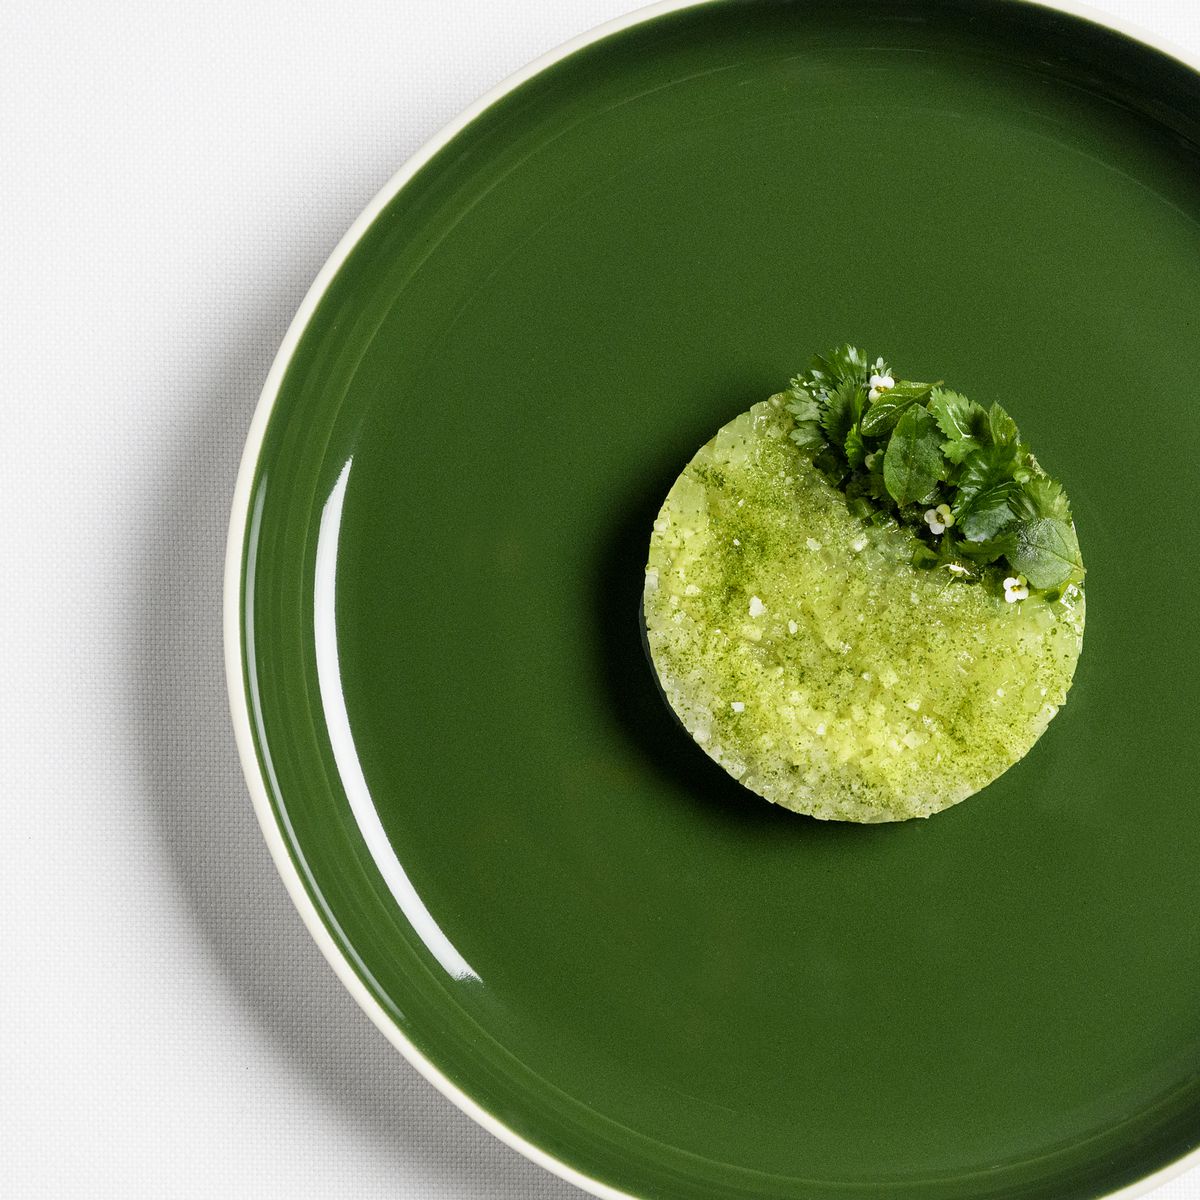 A tartare of cucumber with melon sits on a green plate